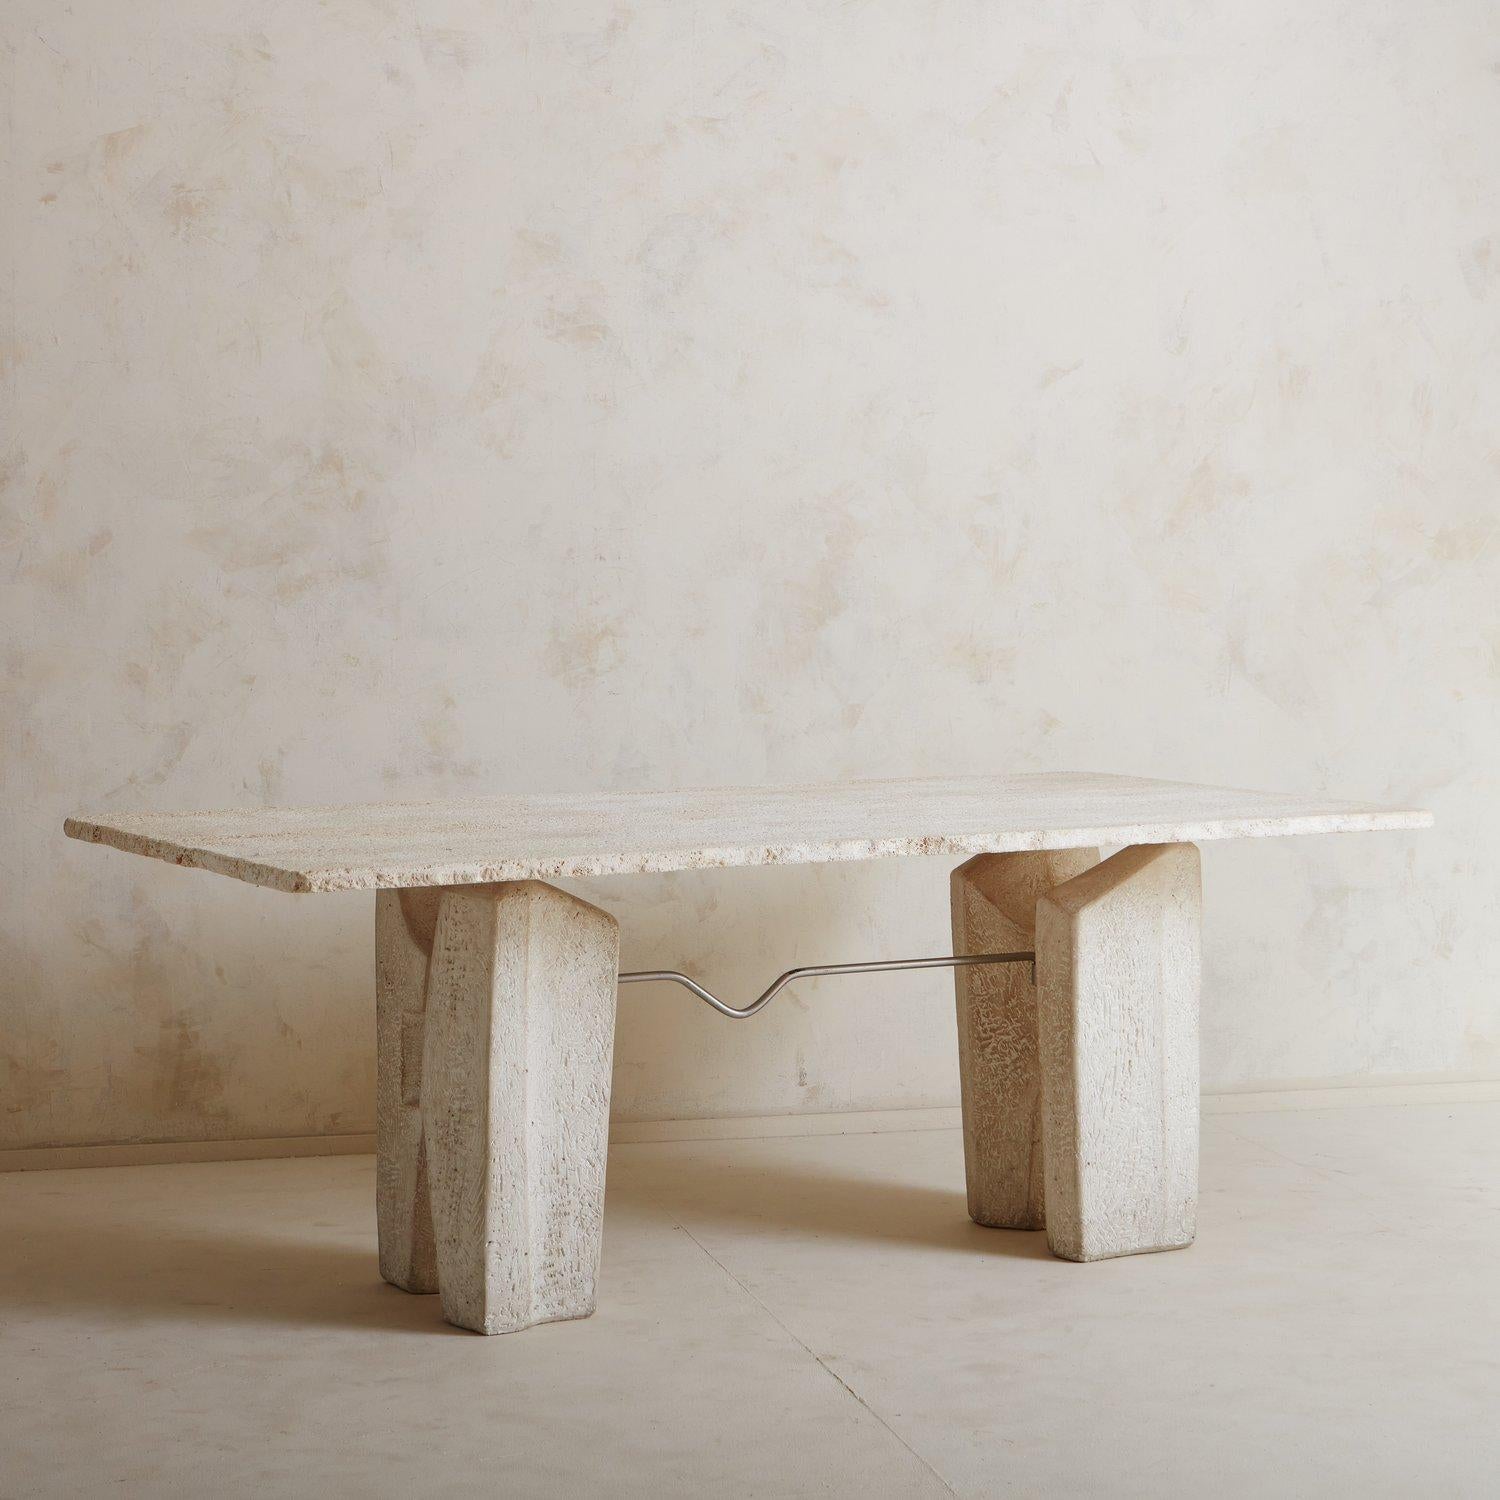 A stately 1970s dining table constructed with travertine. This piece features two sculptural trestle legs which support a thick rectangular top with raw, textured edges. The top sits just above the legs on metal supports, making it appear to float.